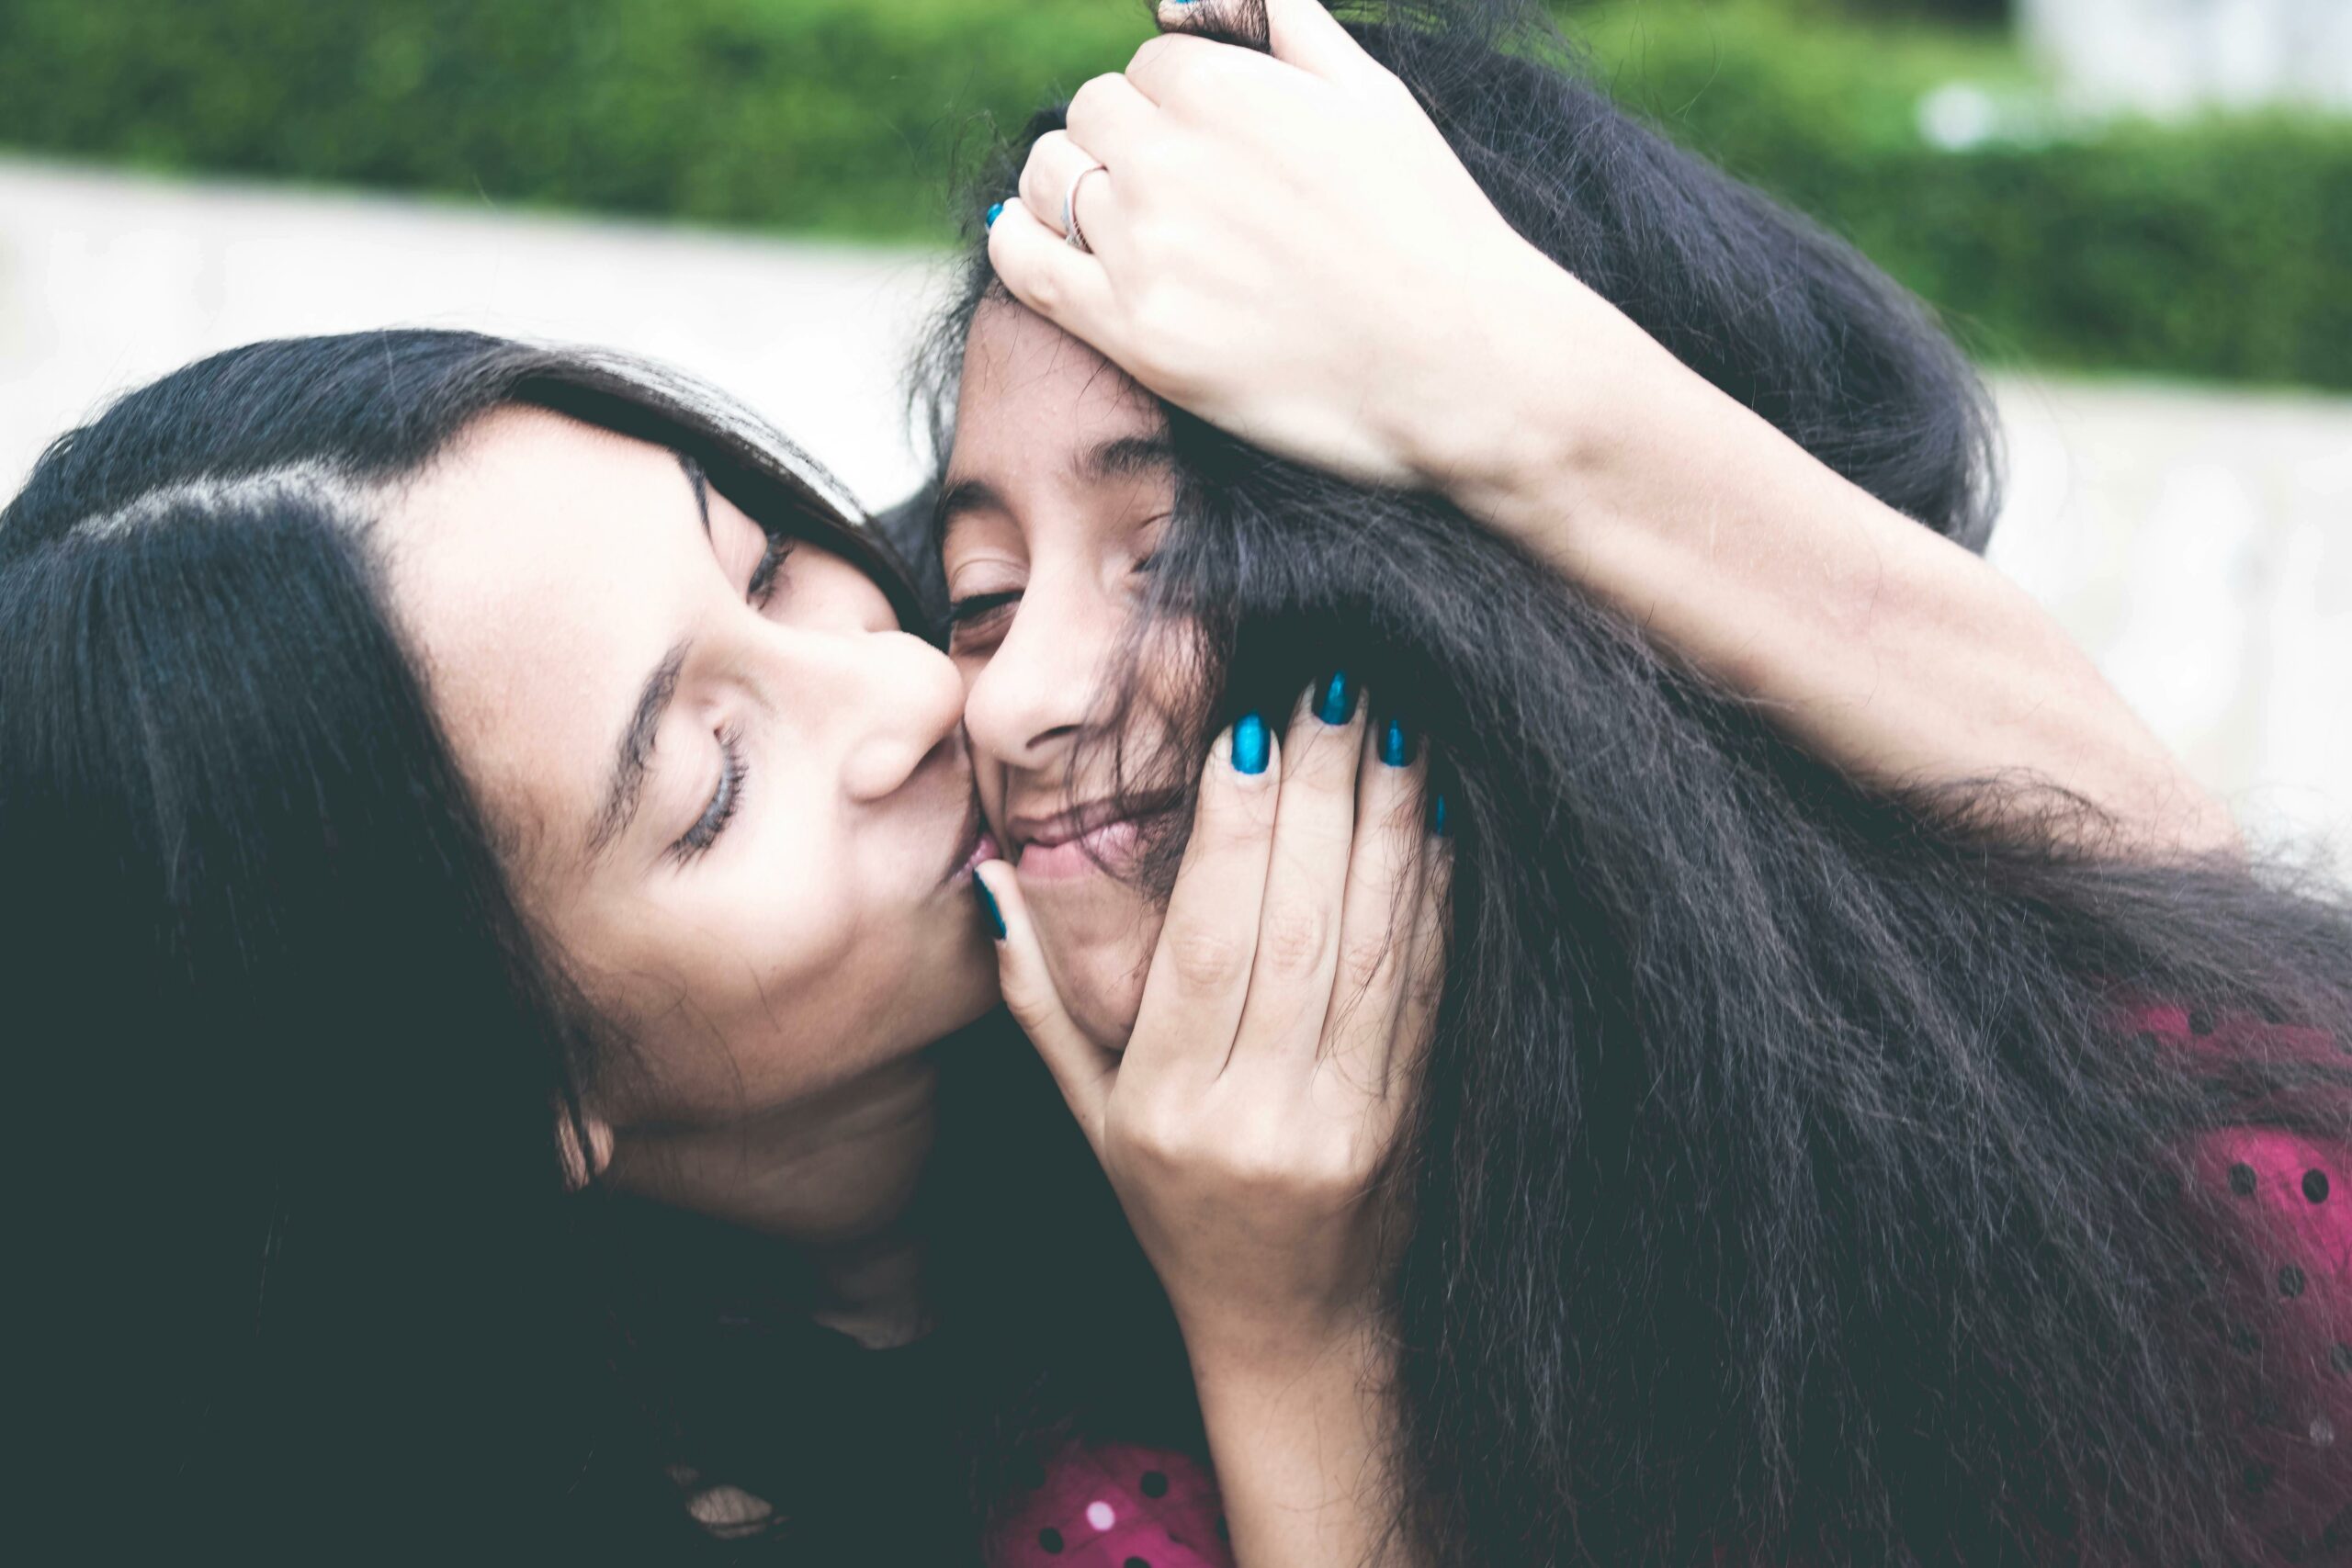 Mother kissing daughter on cheek while hugging head tightly.